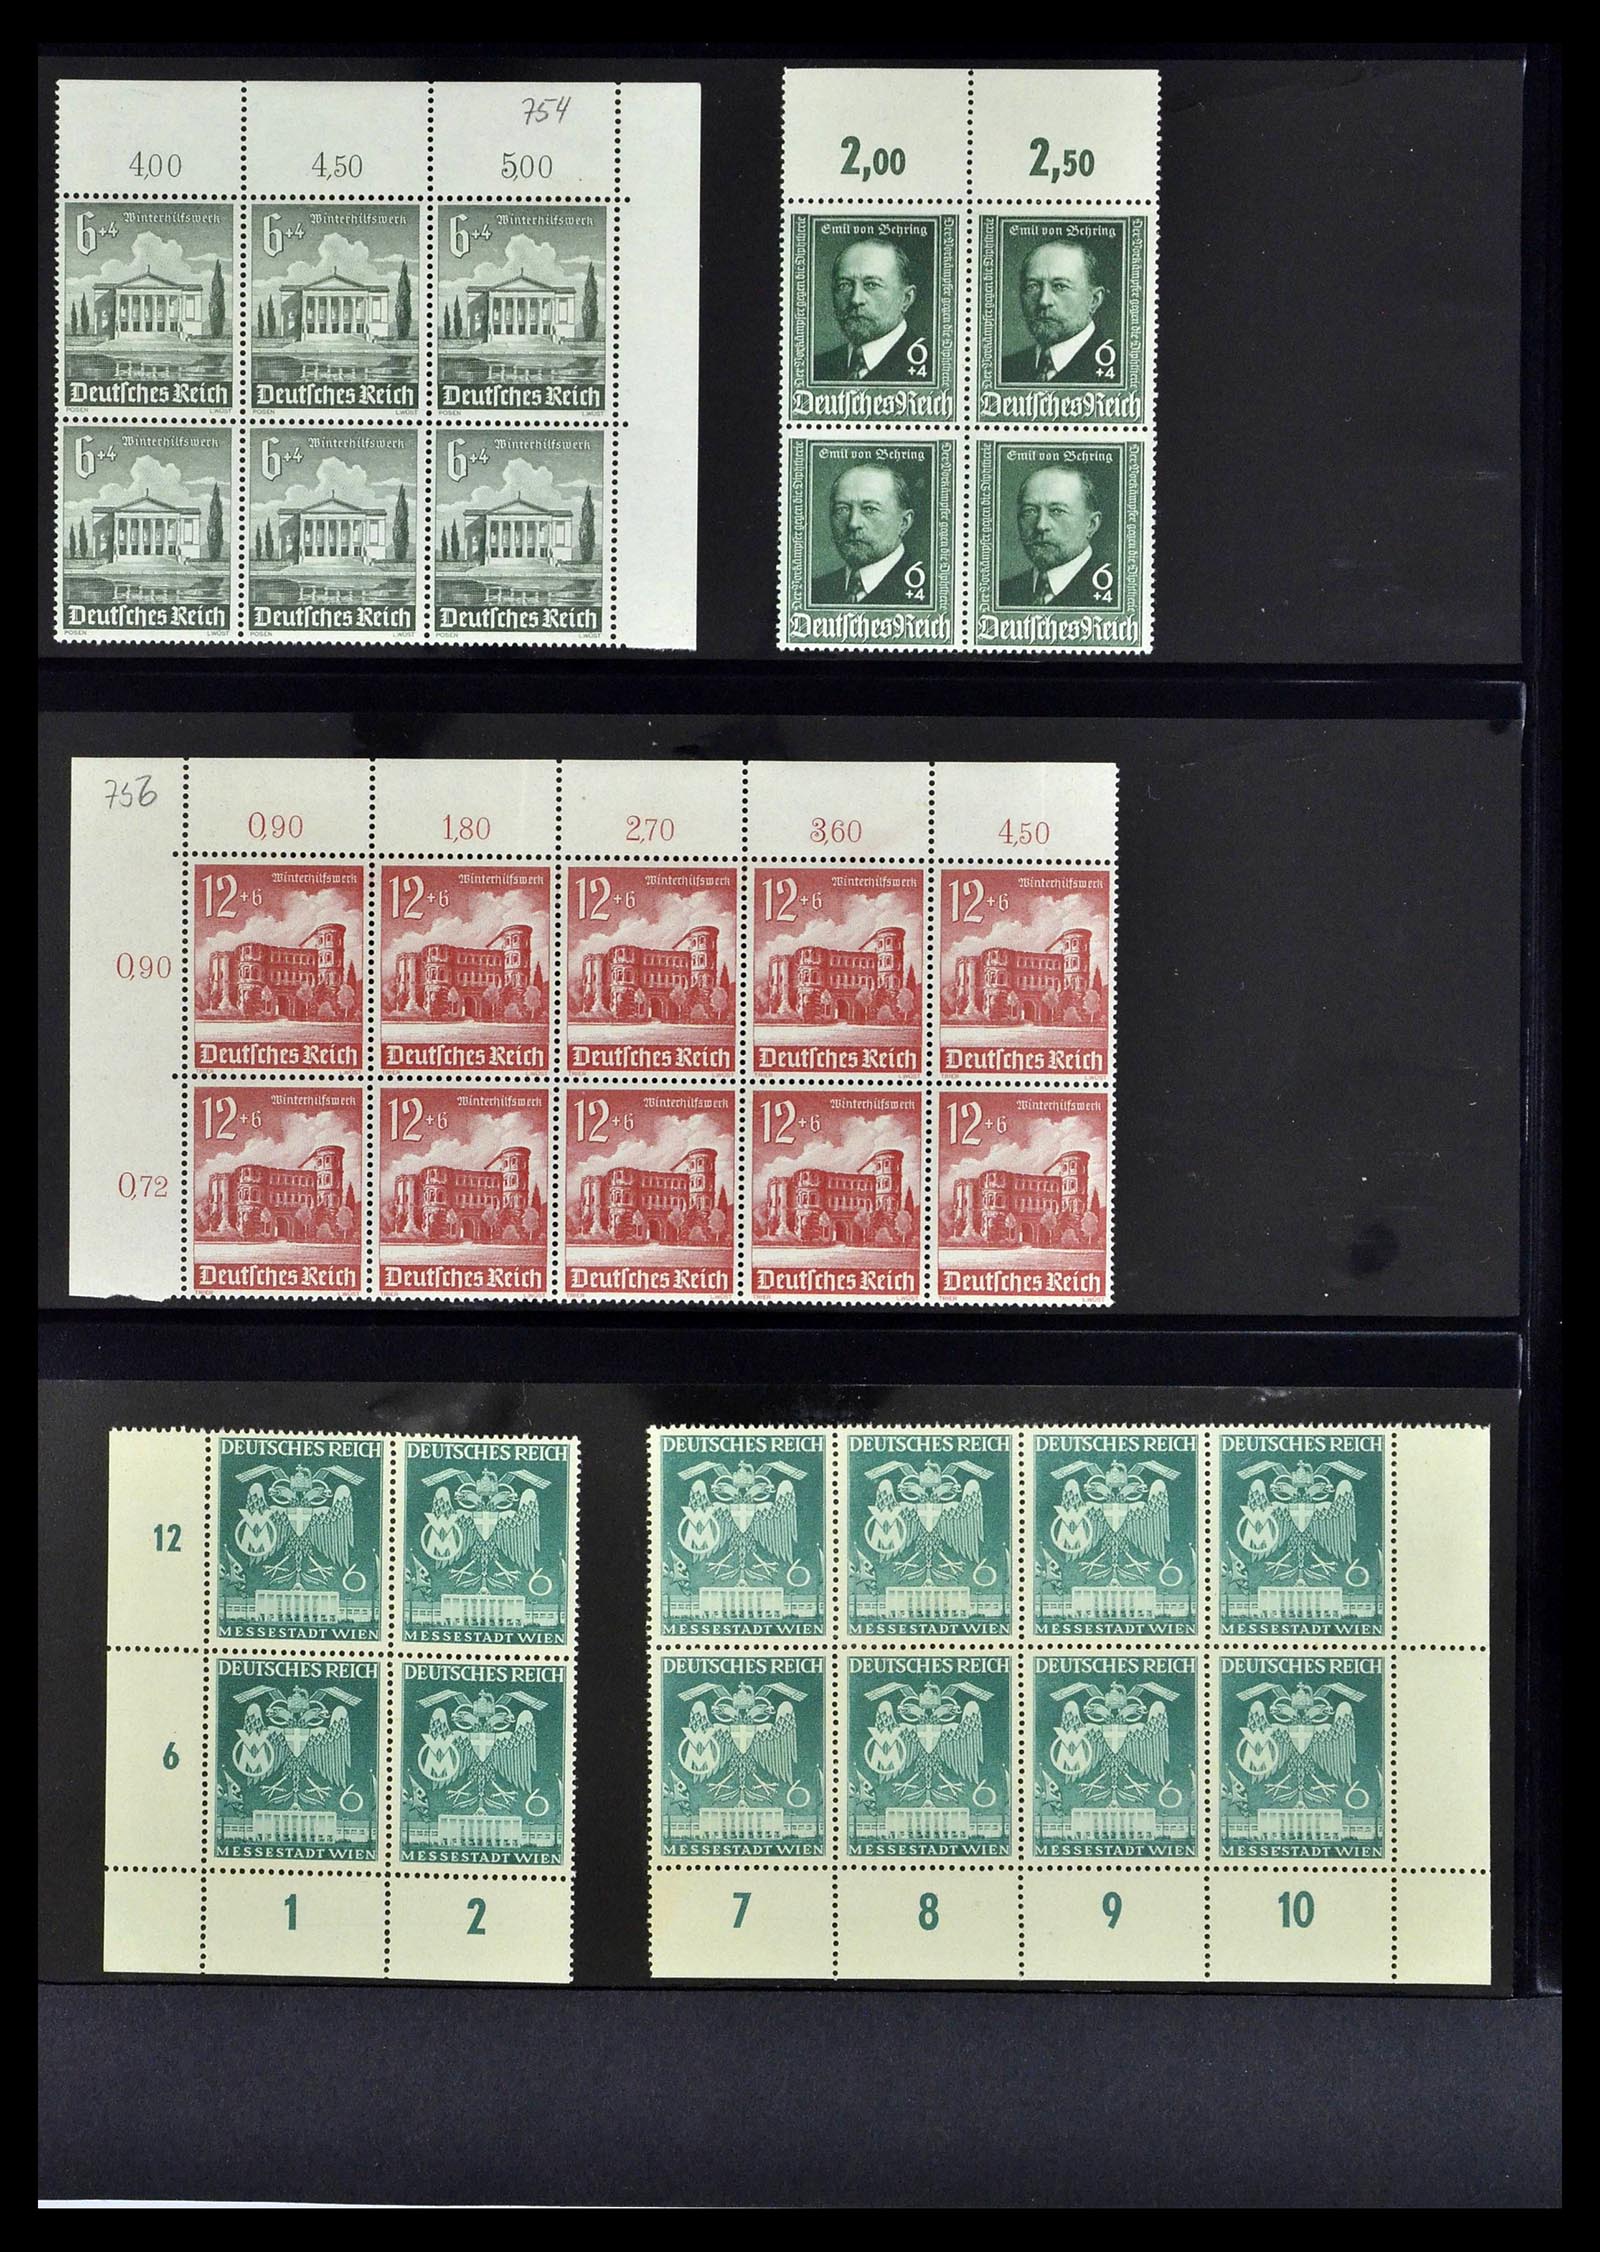 39255 0022 - Stamp collection 39255 German Reich MNH blocks of 4.